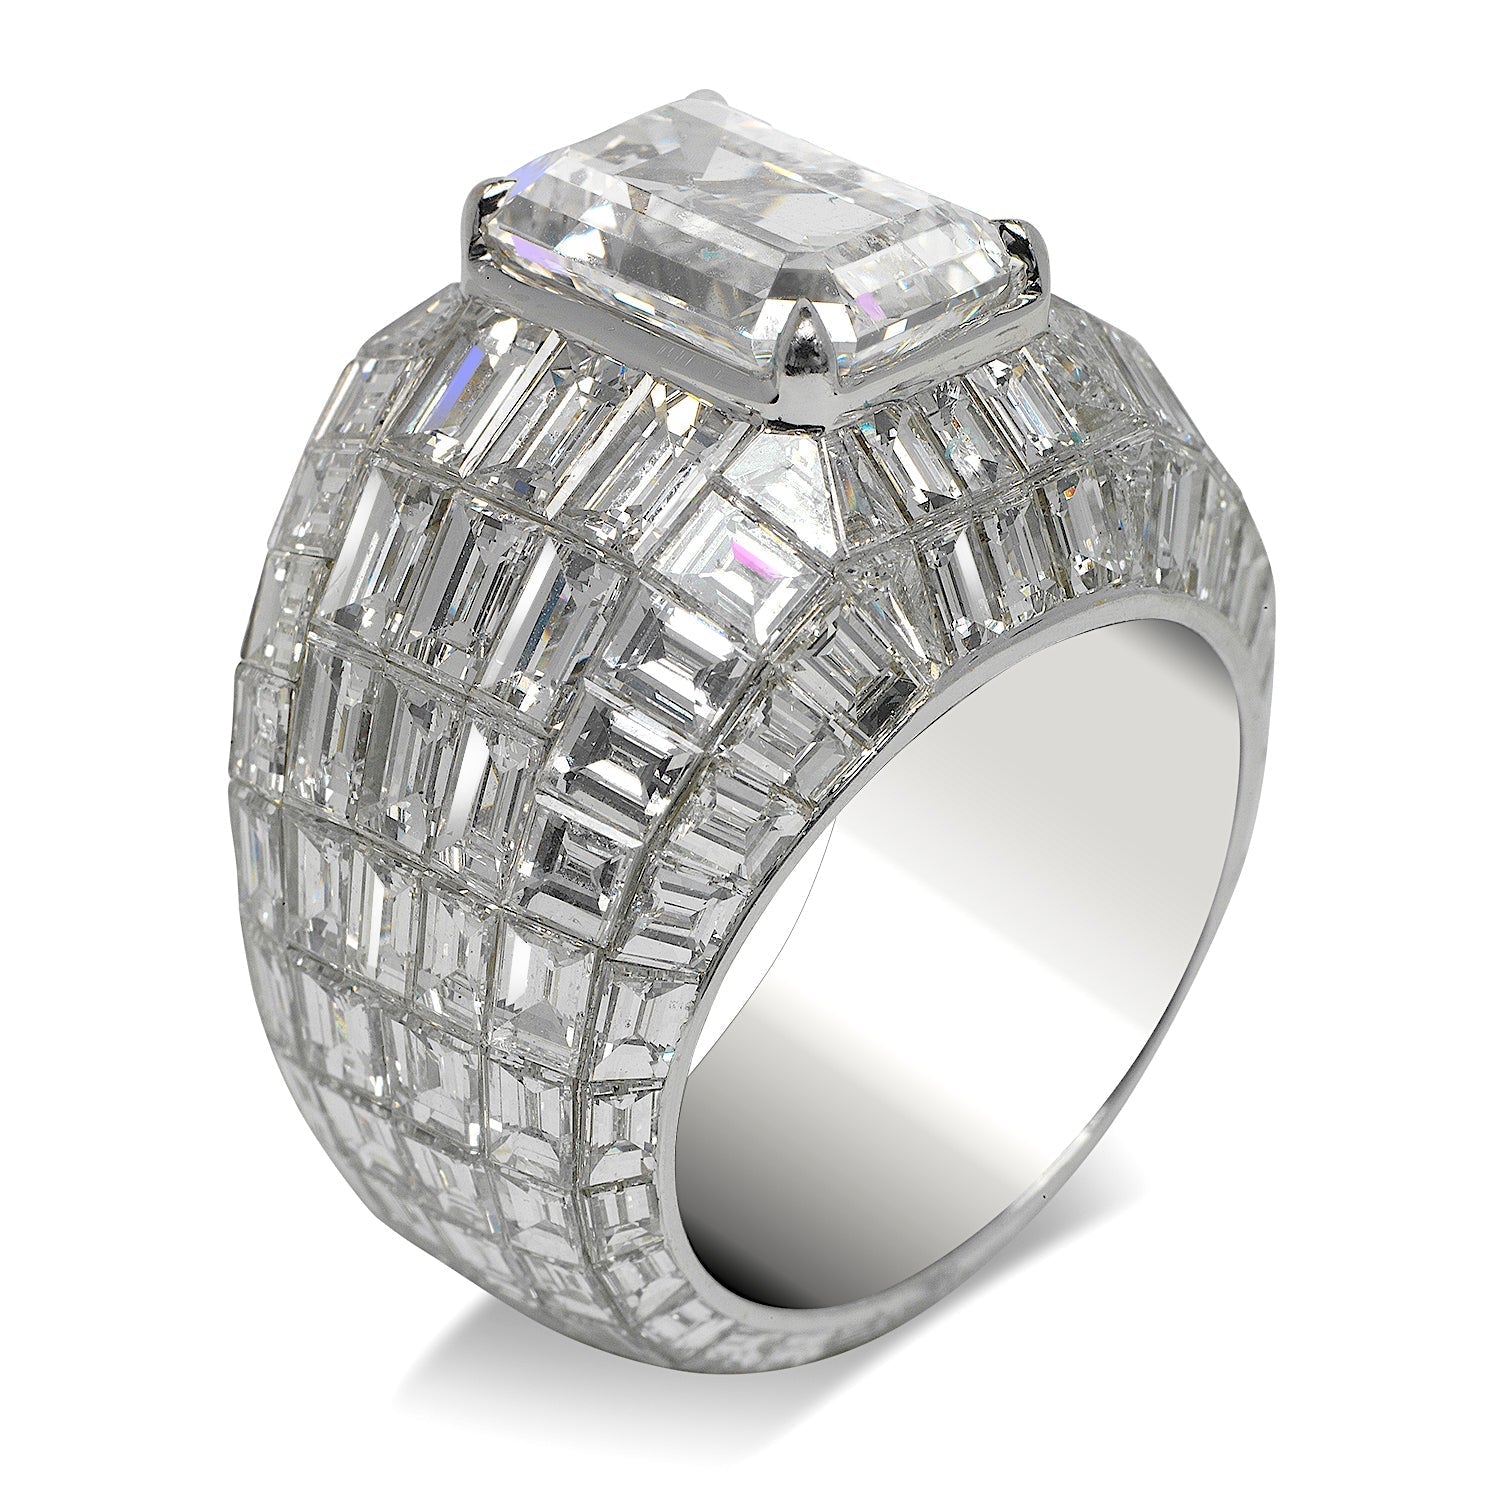 Men's Diamond Engagement Ring Emerald Cut 25 Carat Chandelier Ring in 18K White Gold Side View